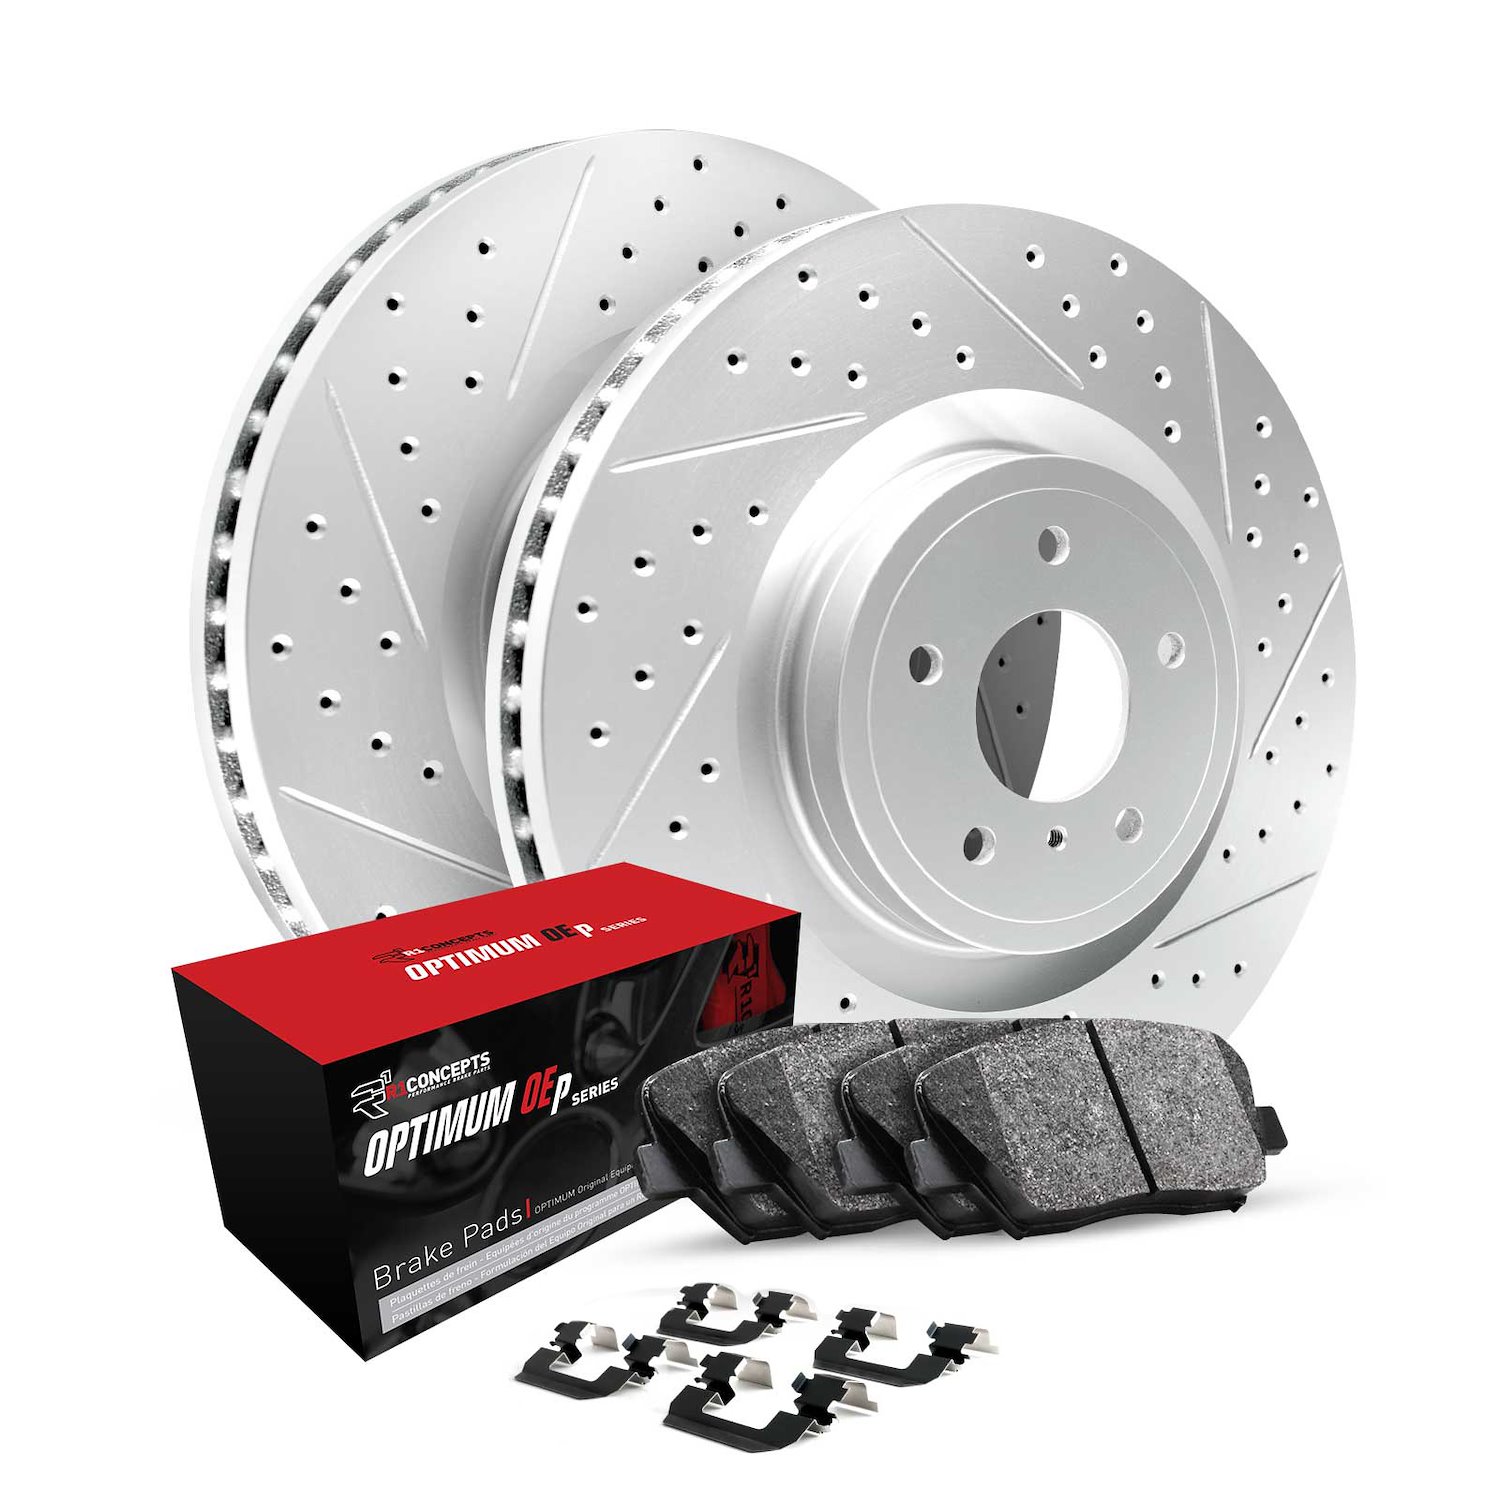 GEO-Carbon Drilled/Slotted Rotors w/Optimum OE Pads/Hardware, 1991-1999 Fits Multiple Makes/Models, Position: Front